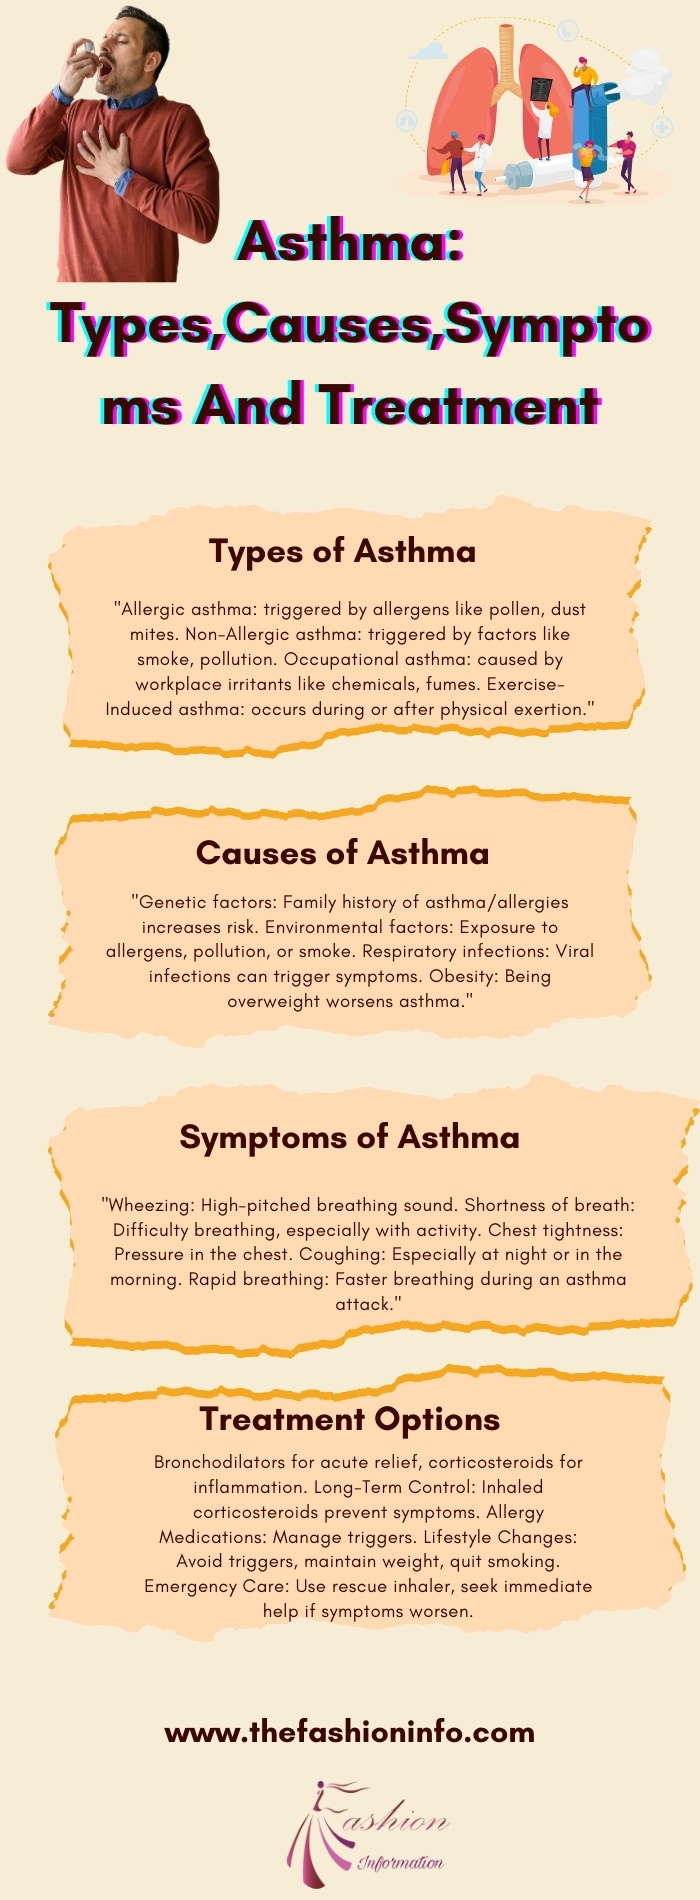 Asthma Types,Causes,Symptoms And Treatment